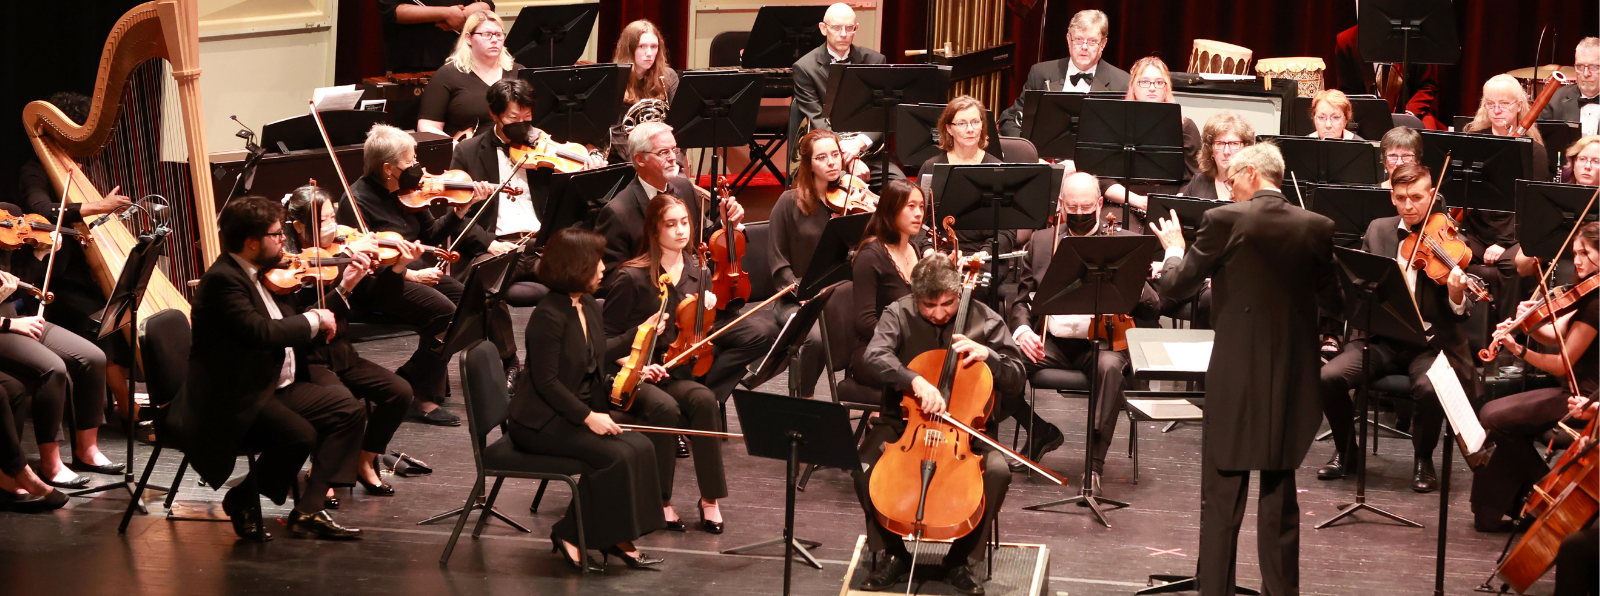 An orchestra is performing while the conductor looks at the cellist in the center.